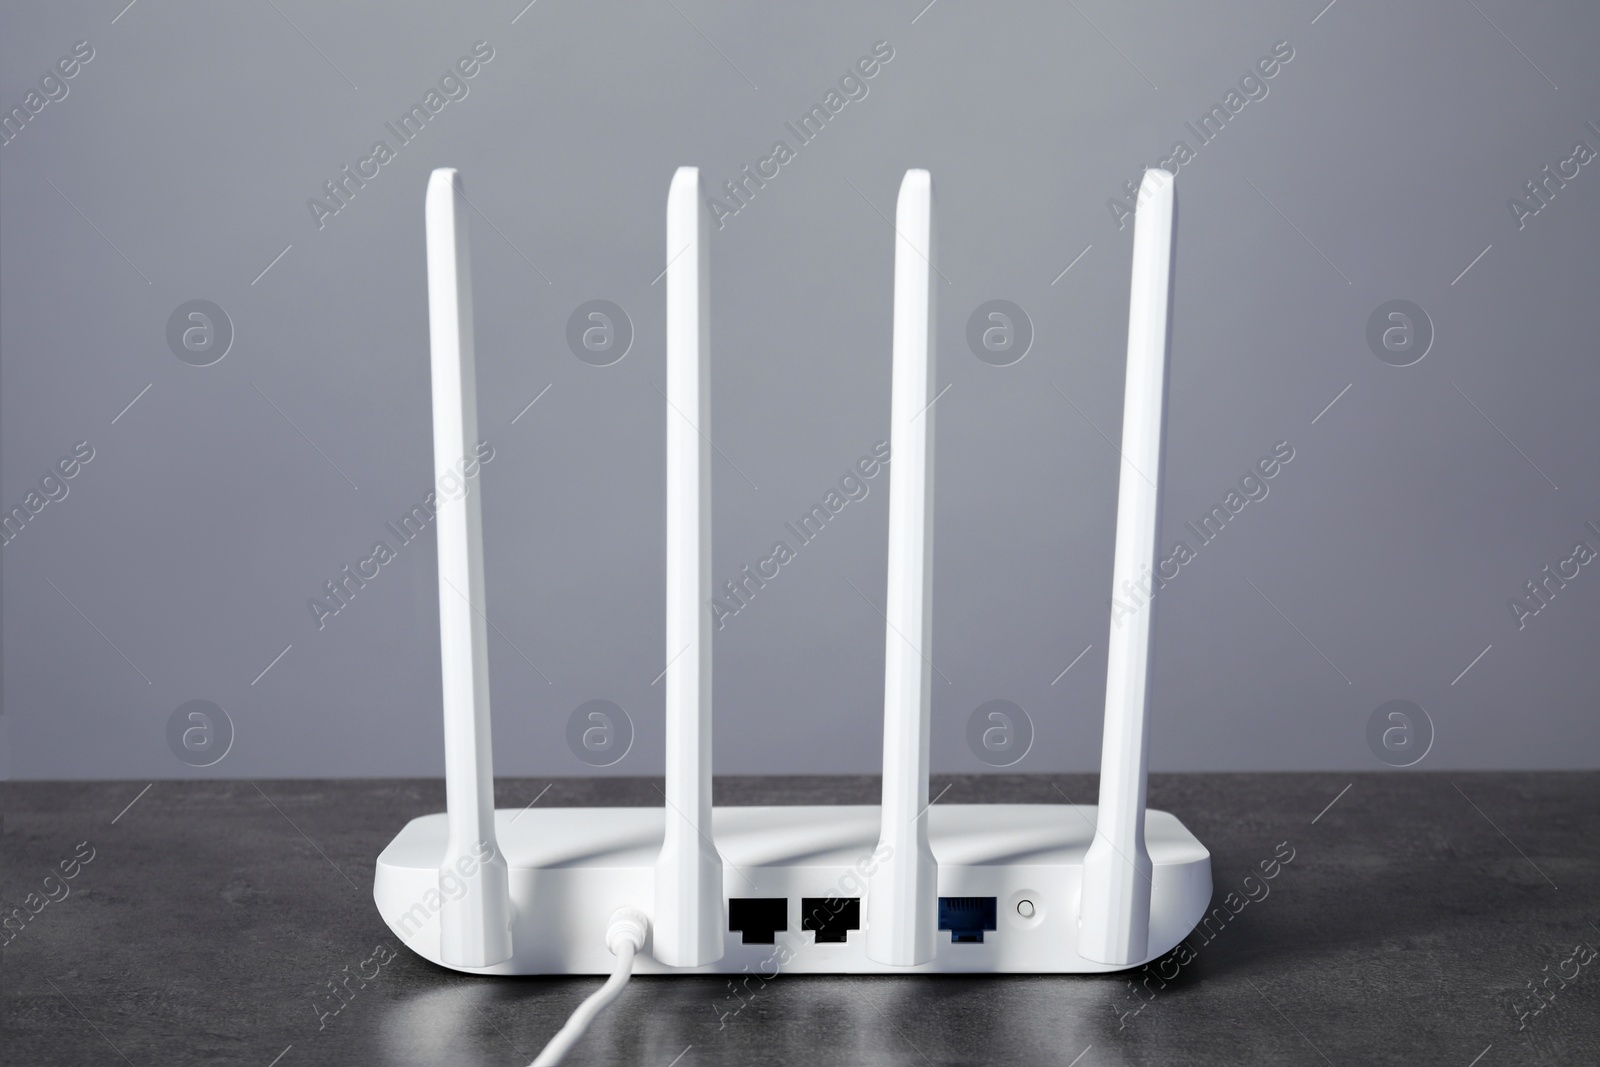 Photo of Wi-Fi router on grey textured table, back view